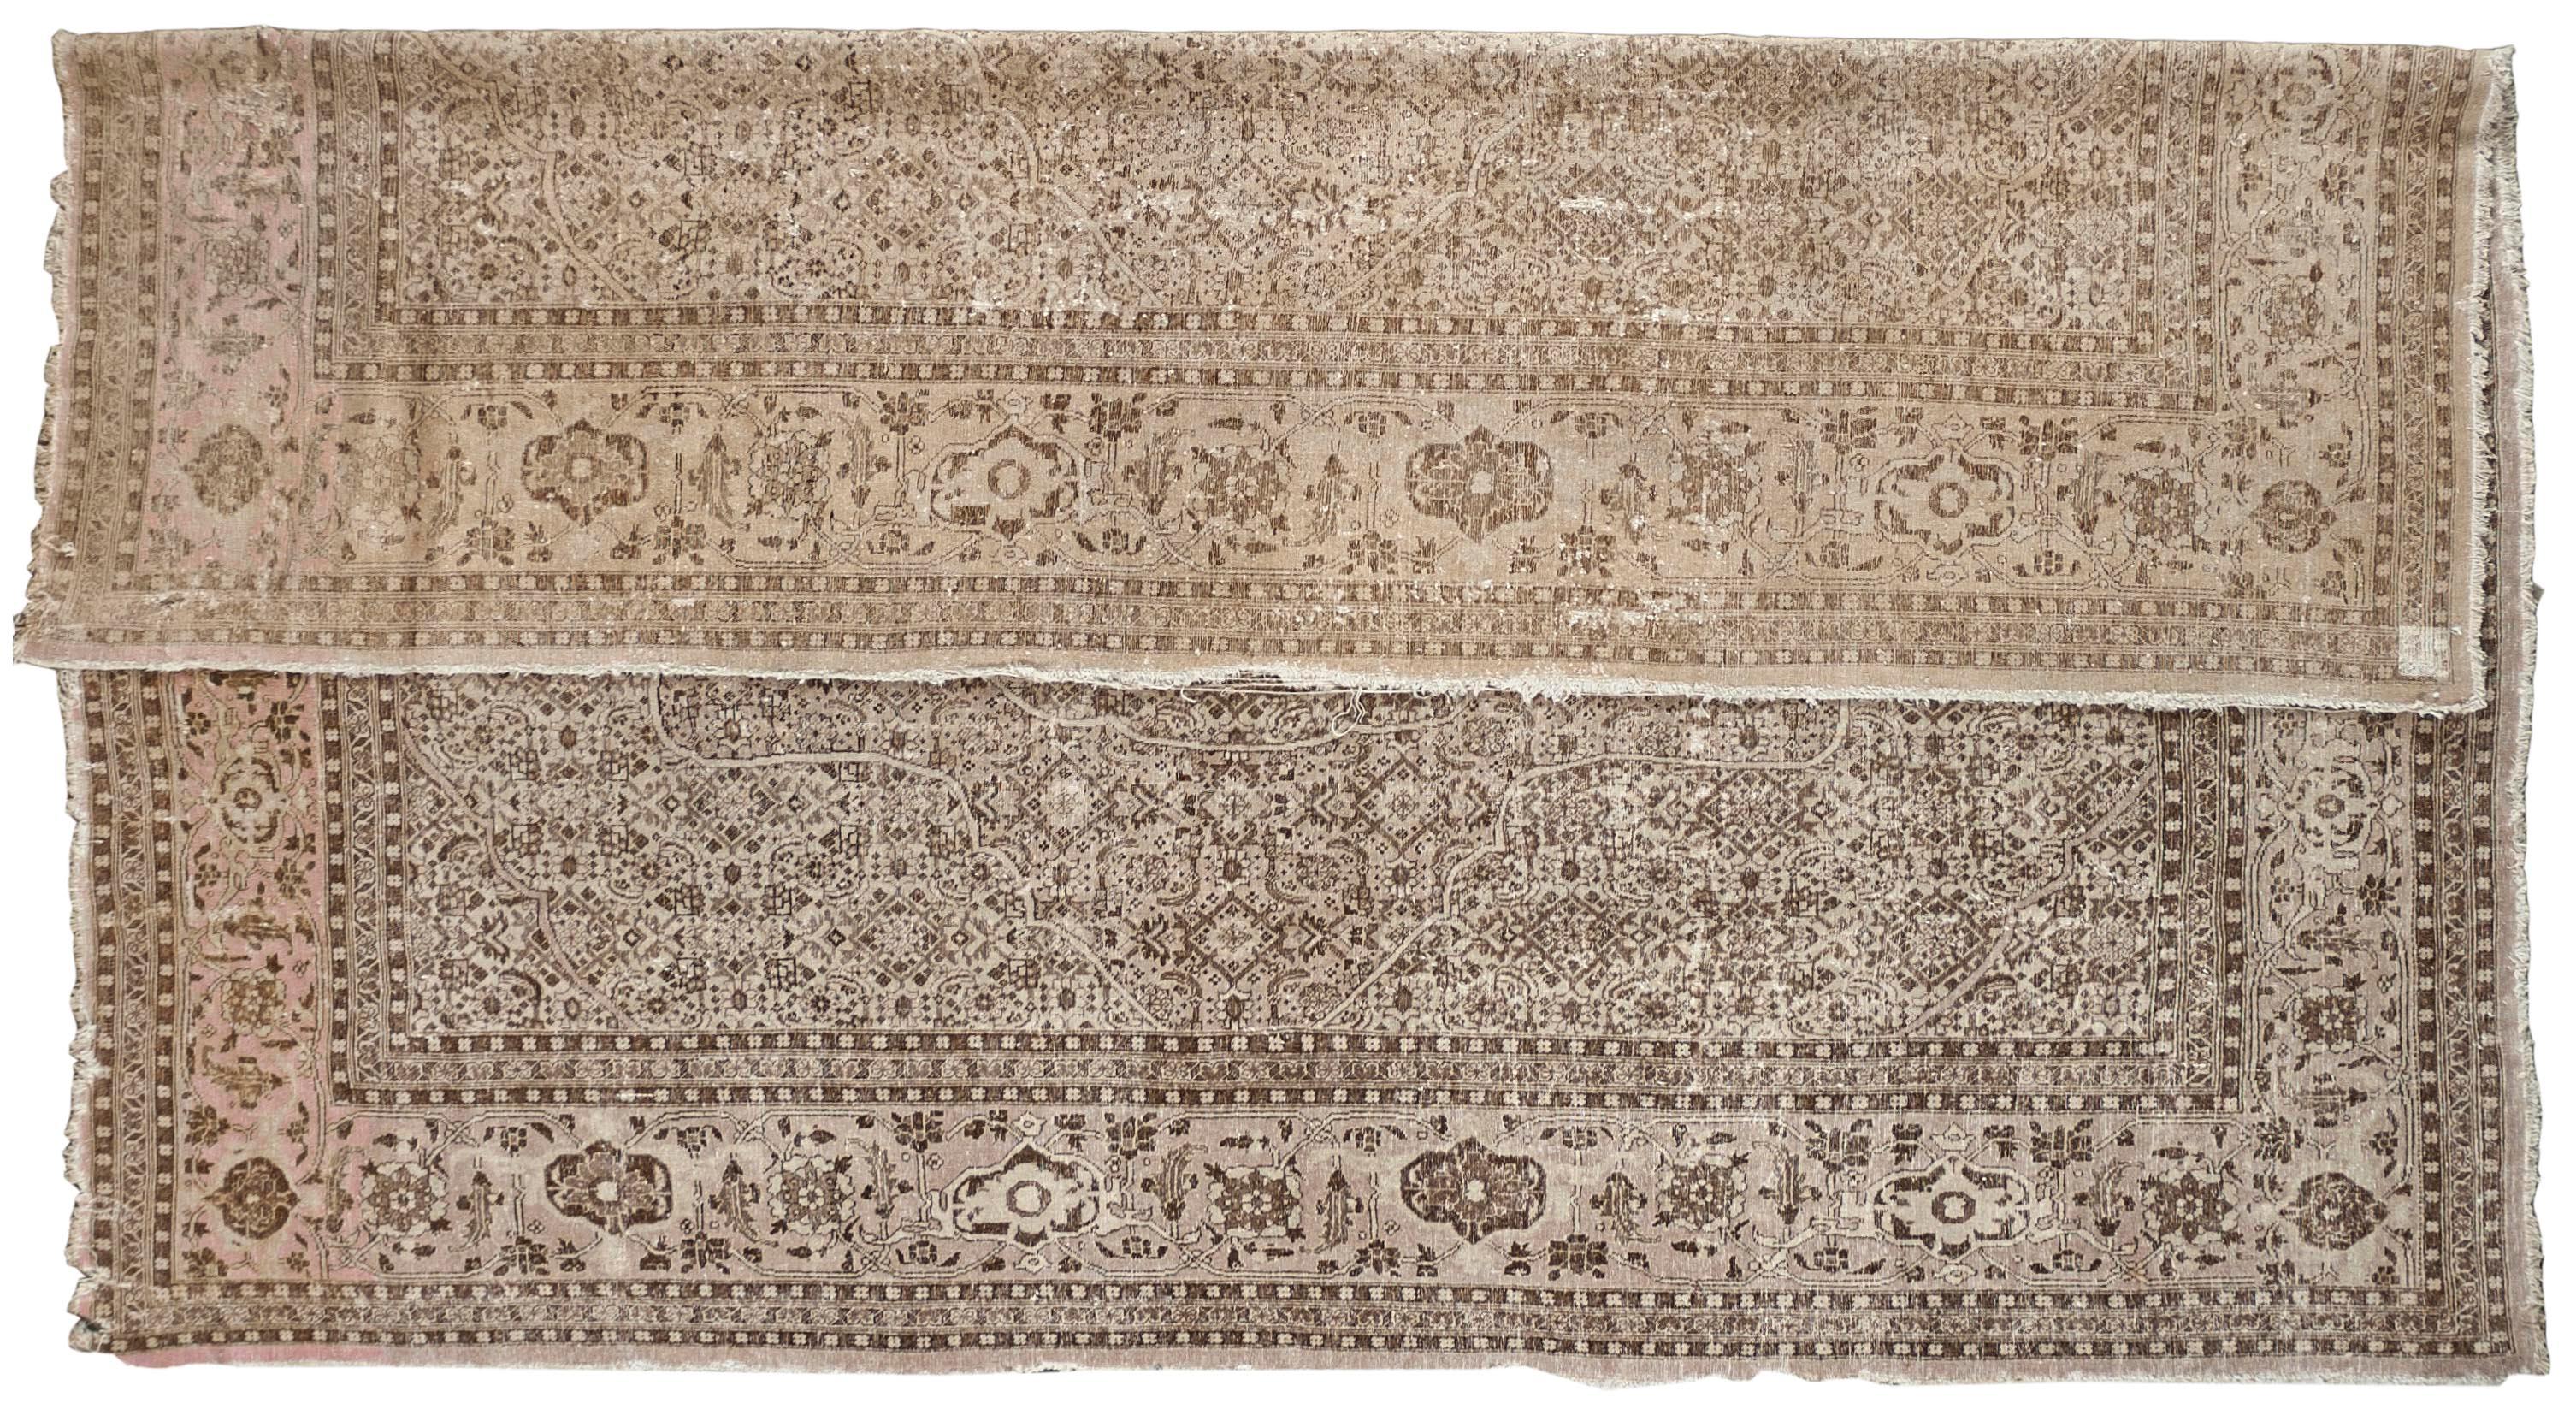 This Antique Distressed Mahal is an all wool Handmade and Hand knotted rug. This distinctive area rug that has a center medallion and wide stylized floral frame is from the 20th century and was made in Iran. The name is derived from the Mahallat